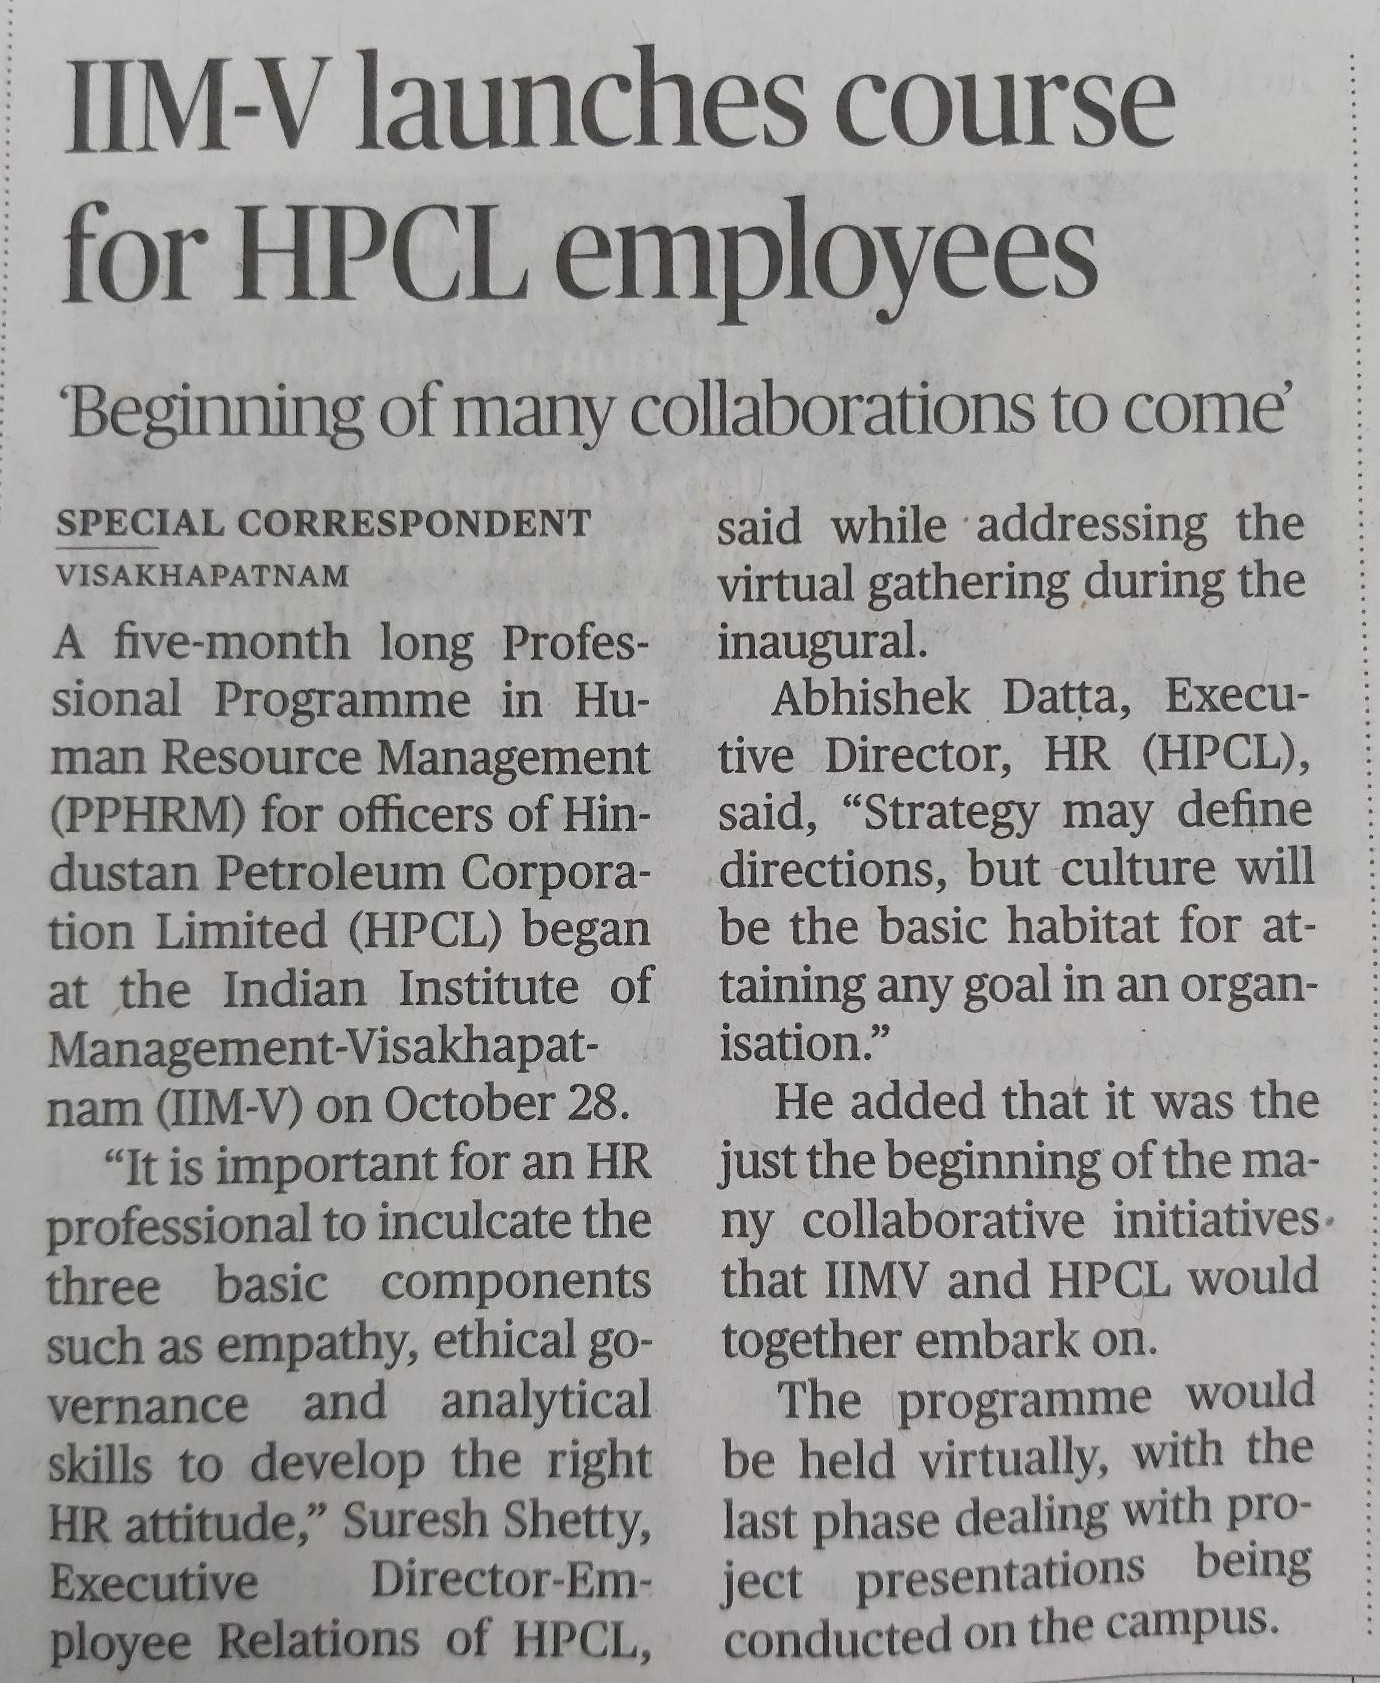 IIM-V launches course for HPCL employees - 29.10.2021